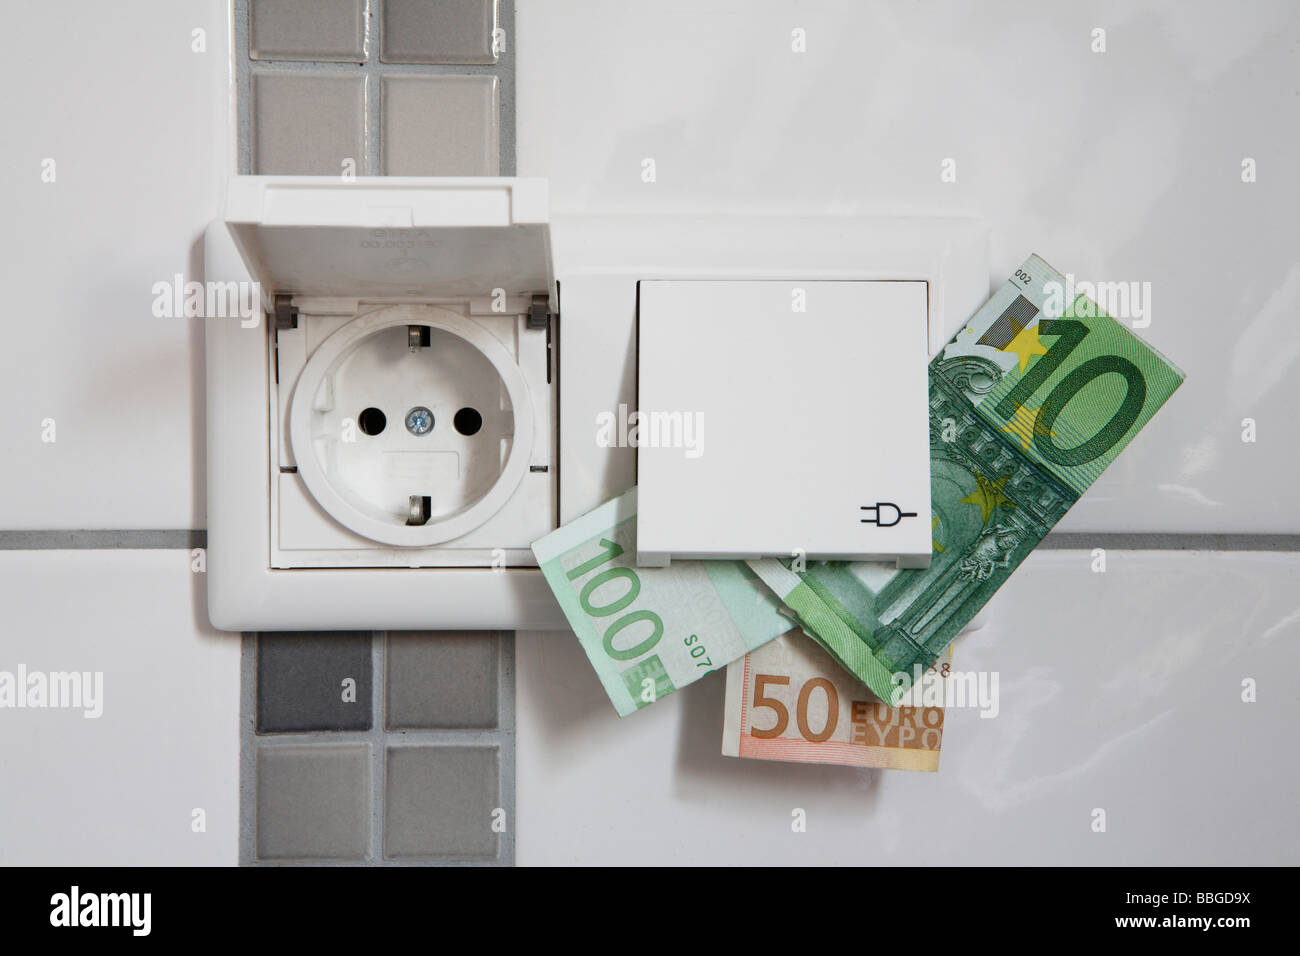 Outlets with protective covers and banknotes Stock Photo